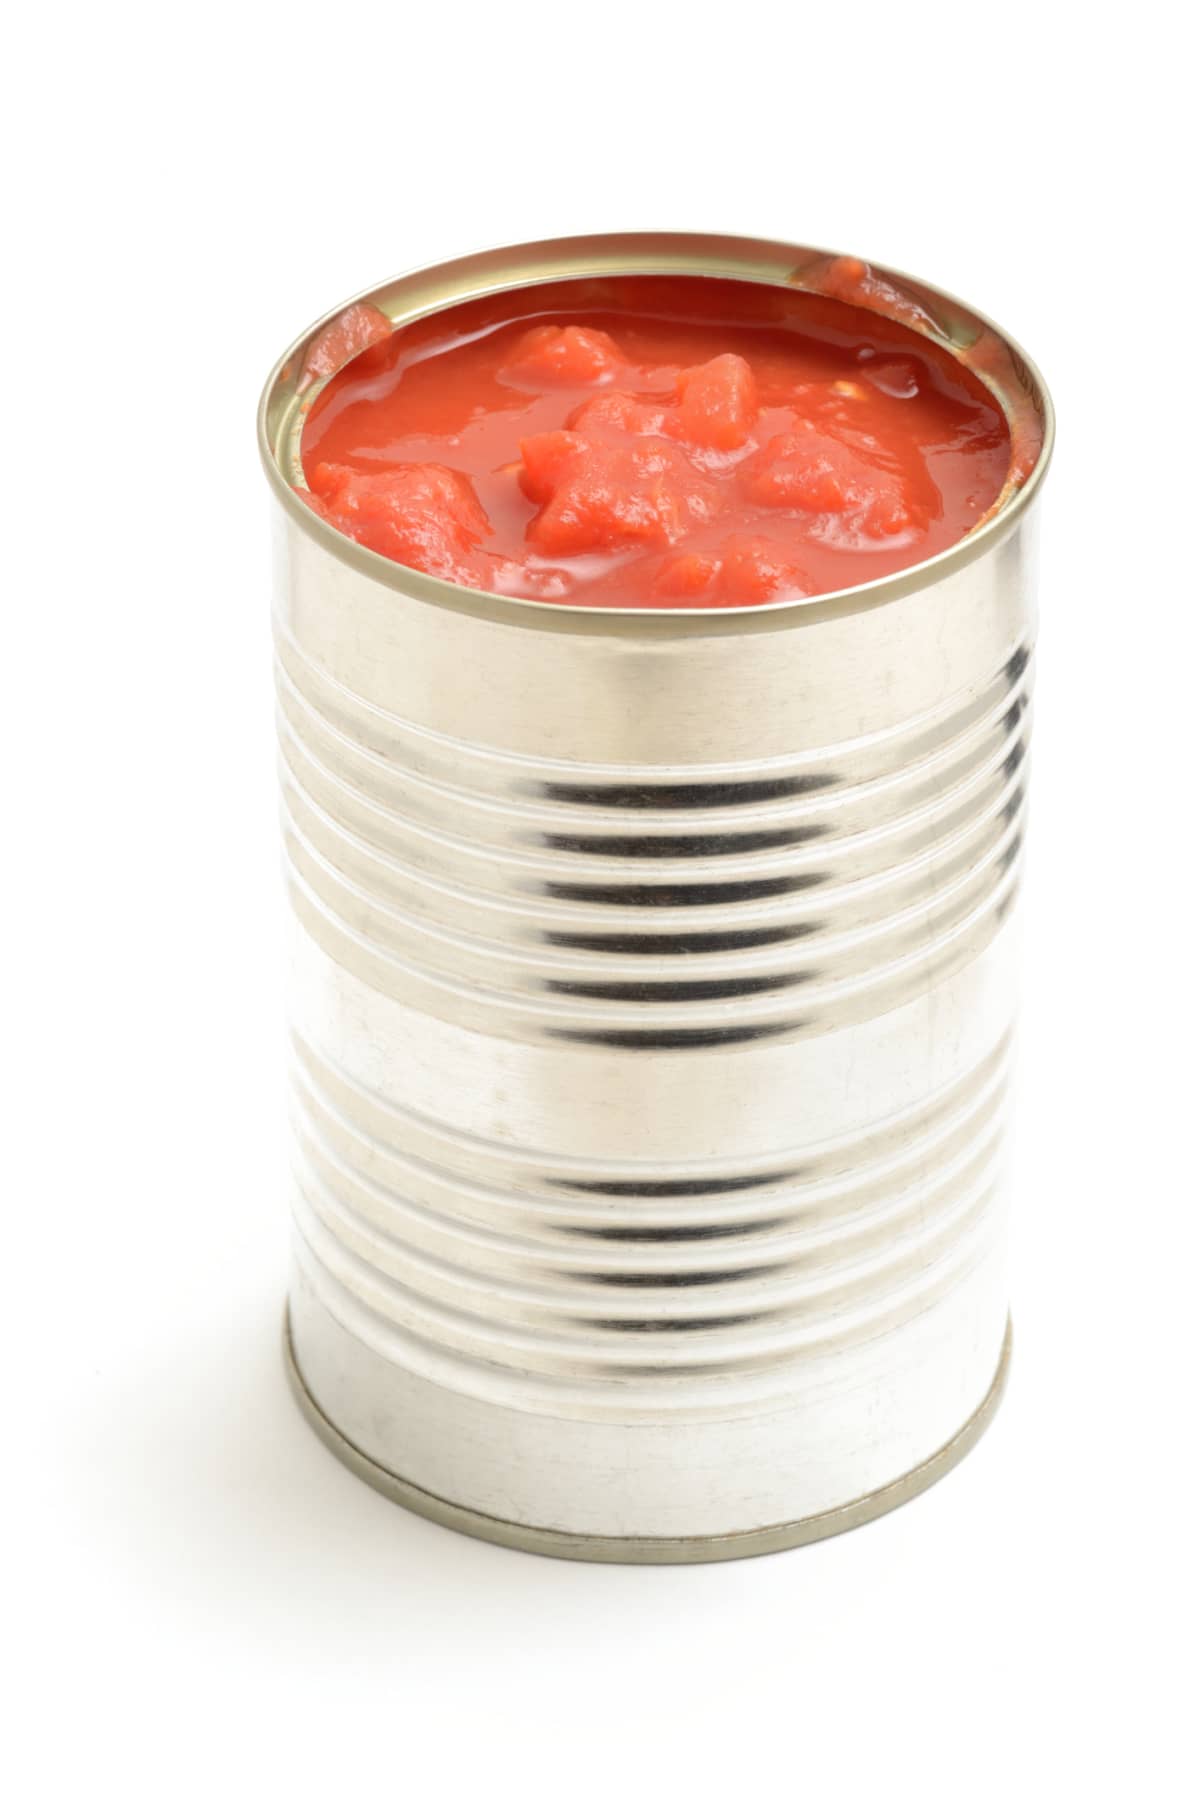 Chopped tomatoes in an opened tin, isolated on a white background.